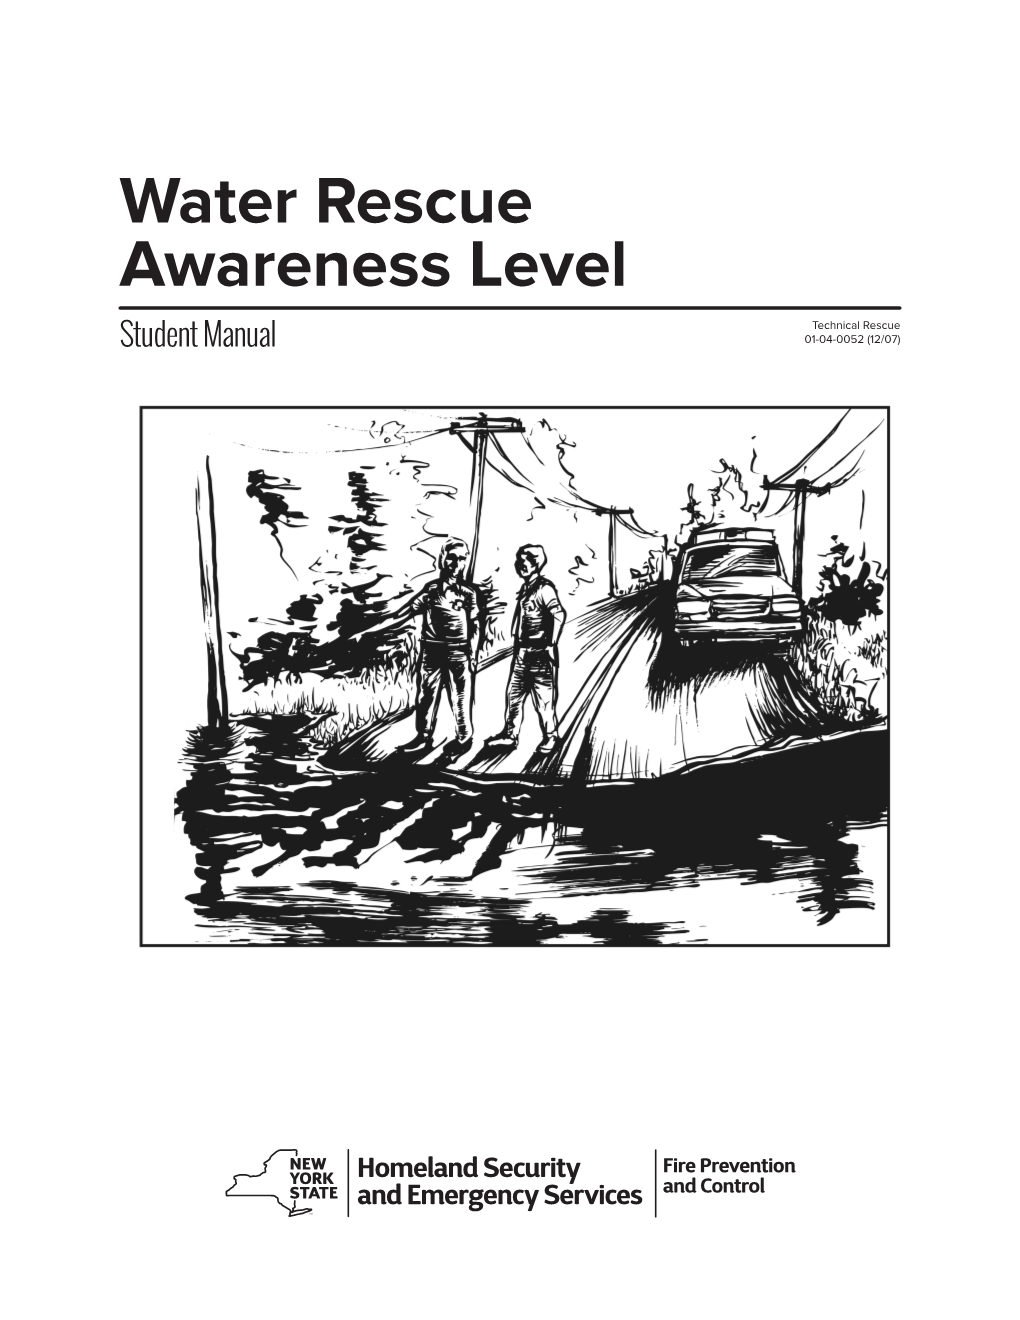 Water Rescue Awareness Level